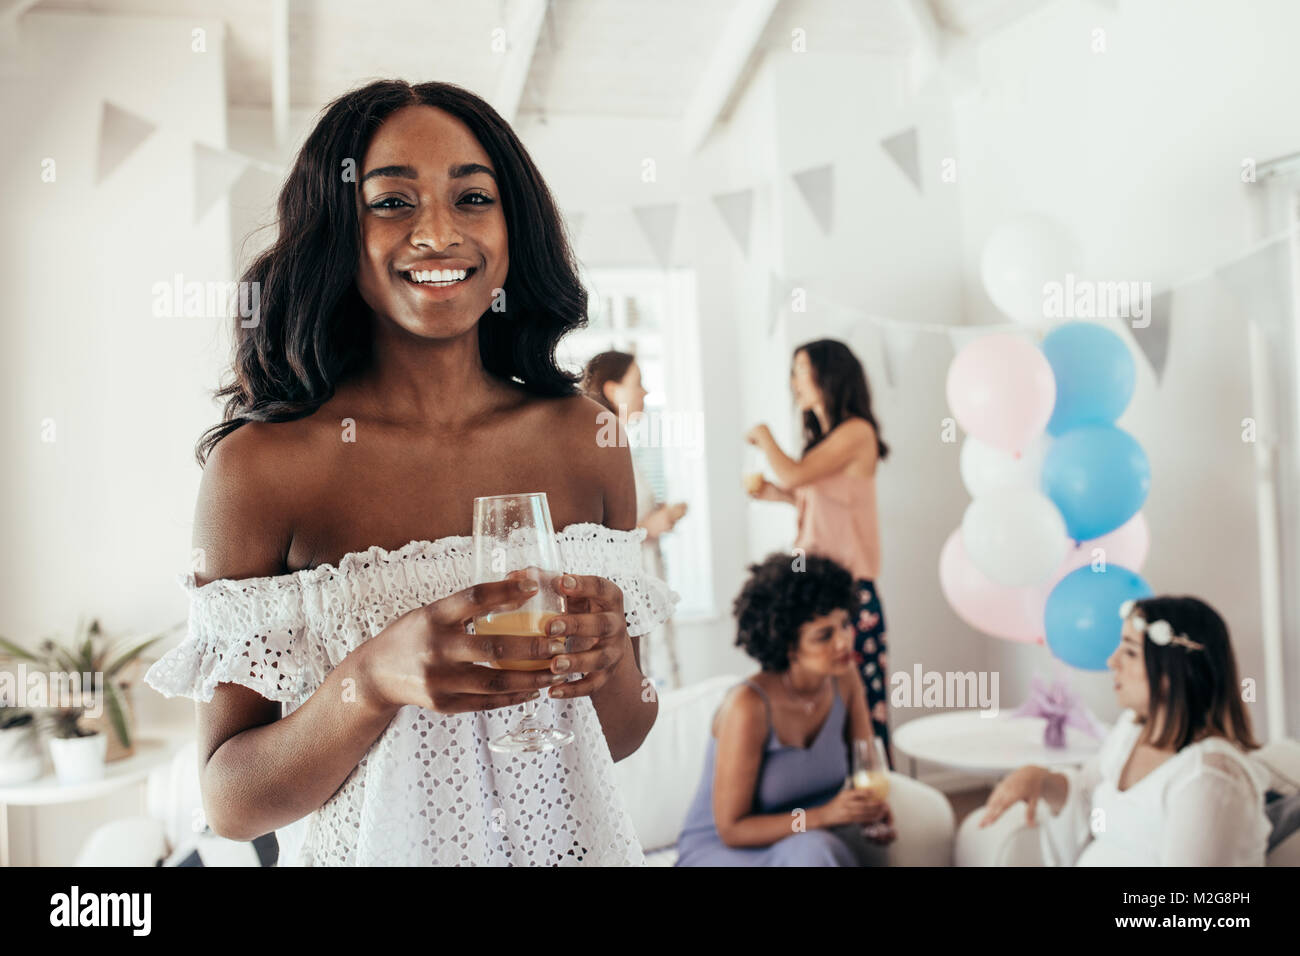 Smiling african young woman holding a glass of juice with friends in background at baby shower party. Female friends at baby shower party at home. Stock Photo